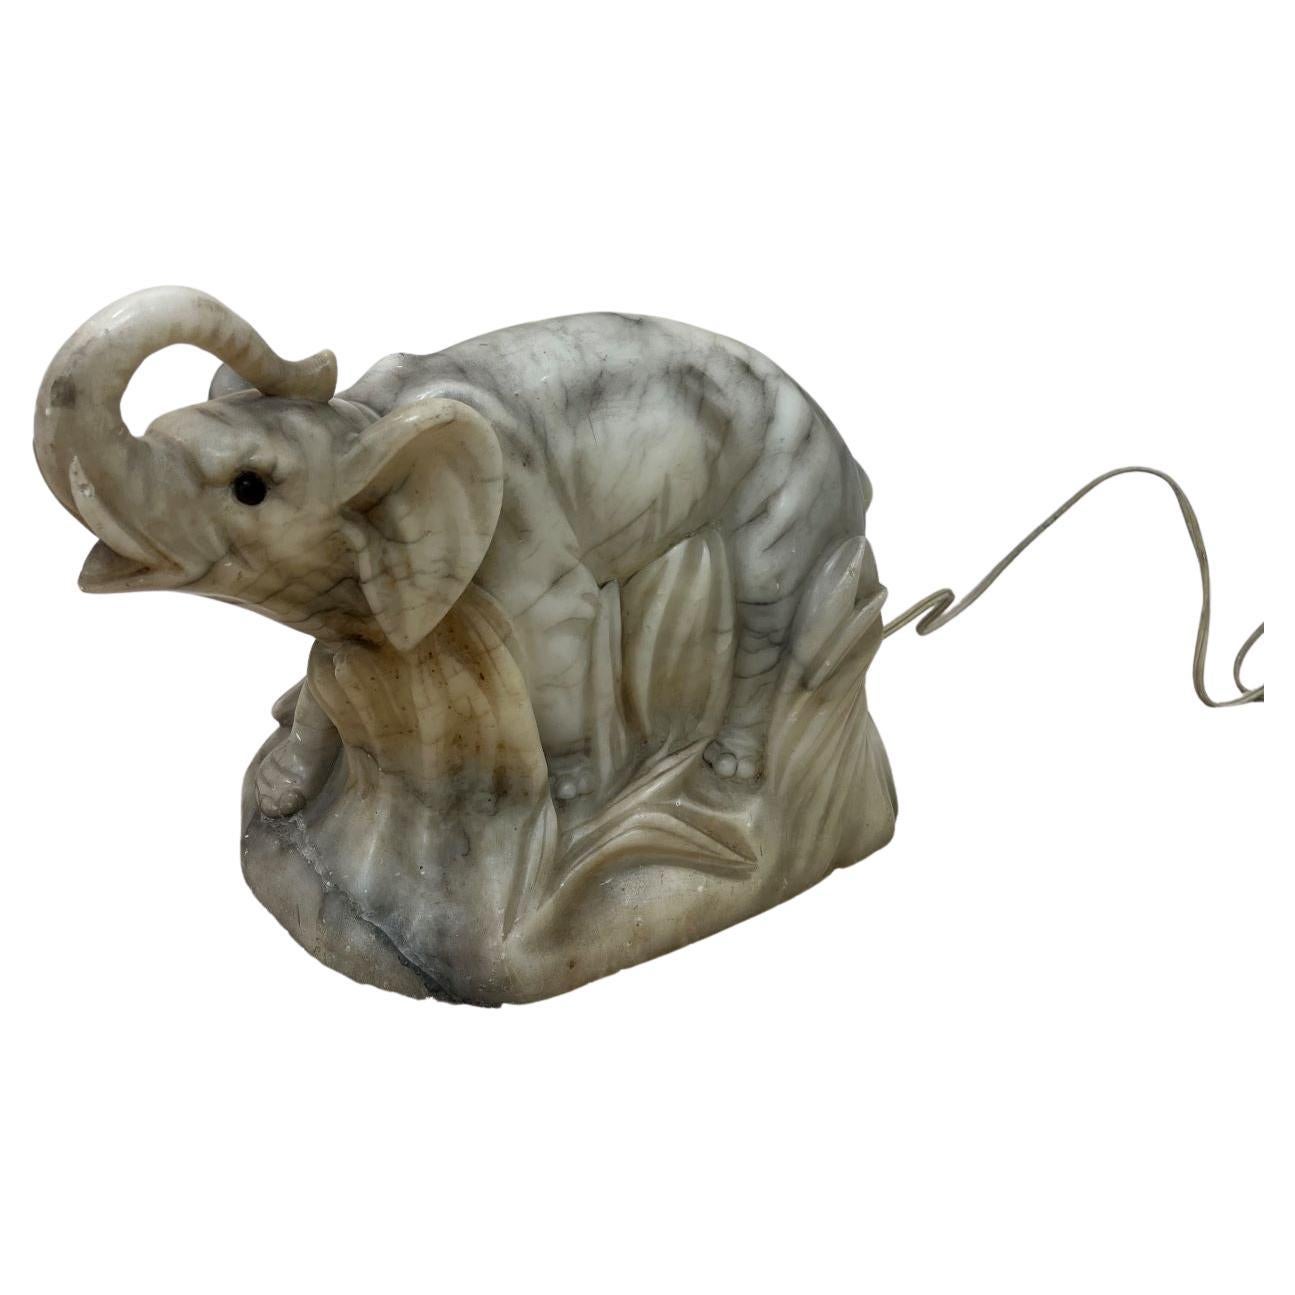 Art Deco / Art Nouveau carved alabaster elephant lamp circa 1920-1930s. When illuminated the lamp has a beautiful and warm glow. Has some minor wear and worn edges and possibly a repair sometime during its lifetime. This beautiful lamp is sure to